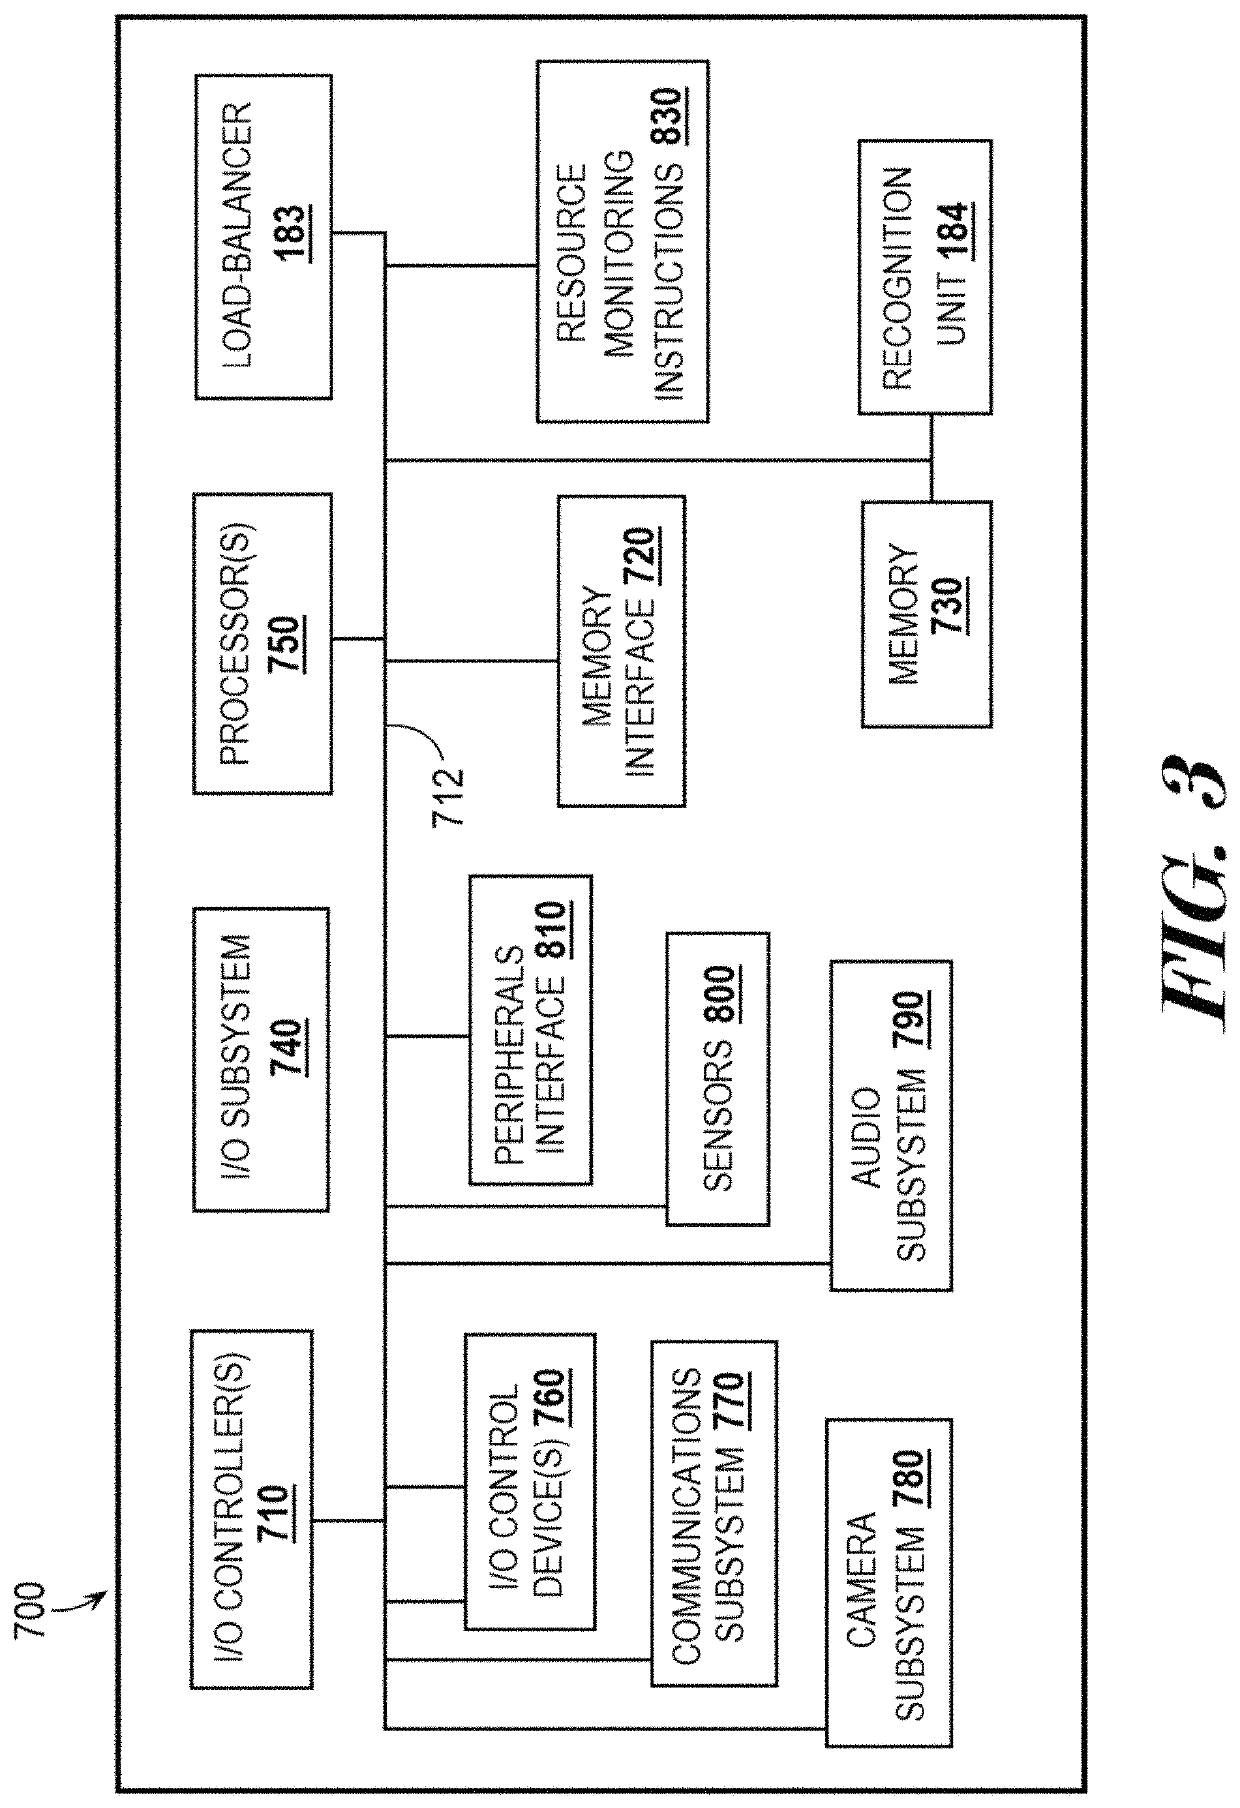 Load balancing multimedia conferencing system, device, and methods